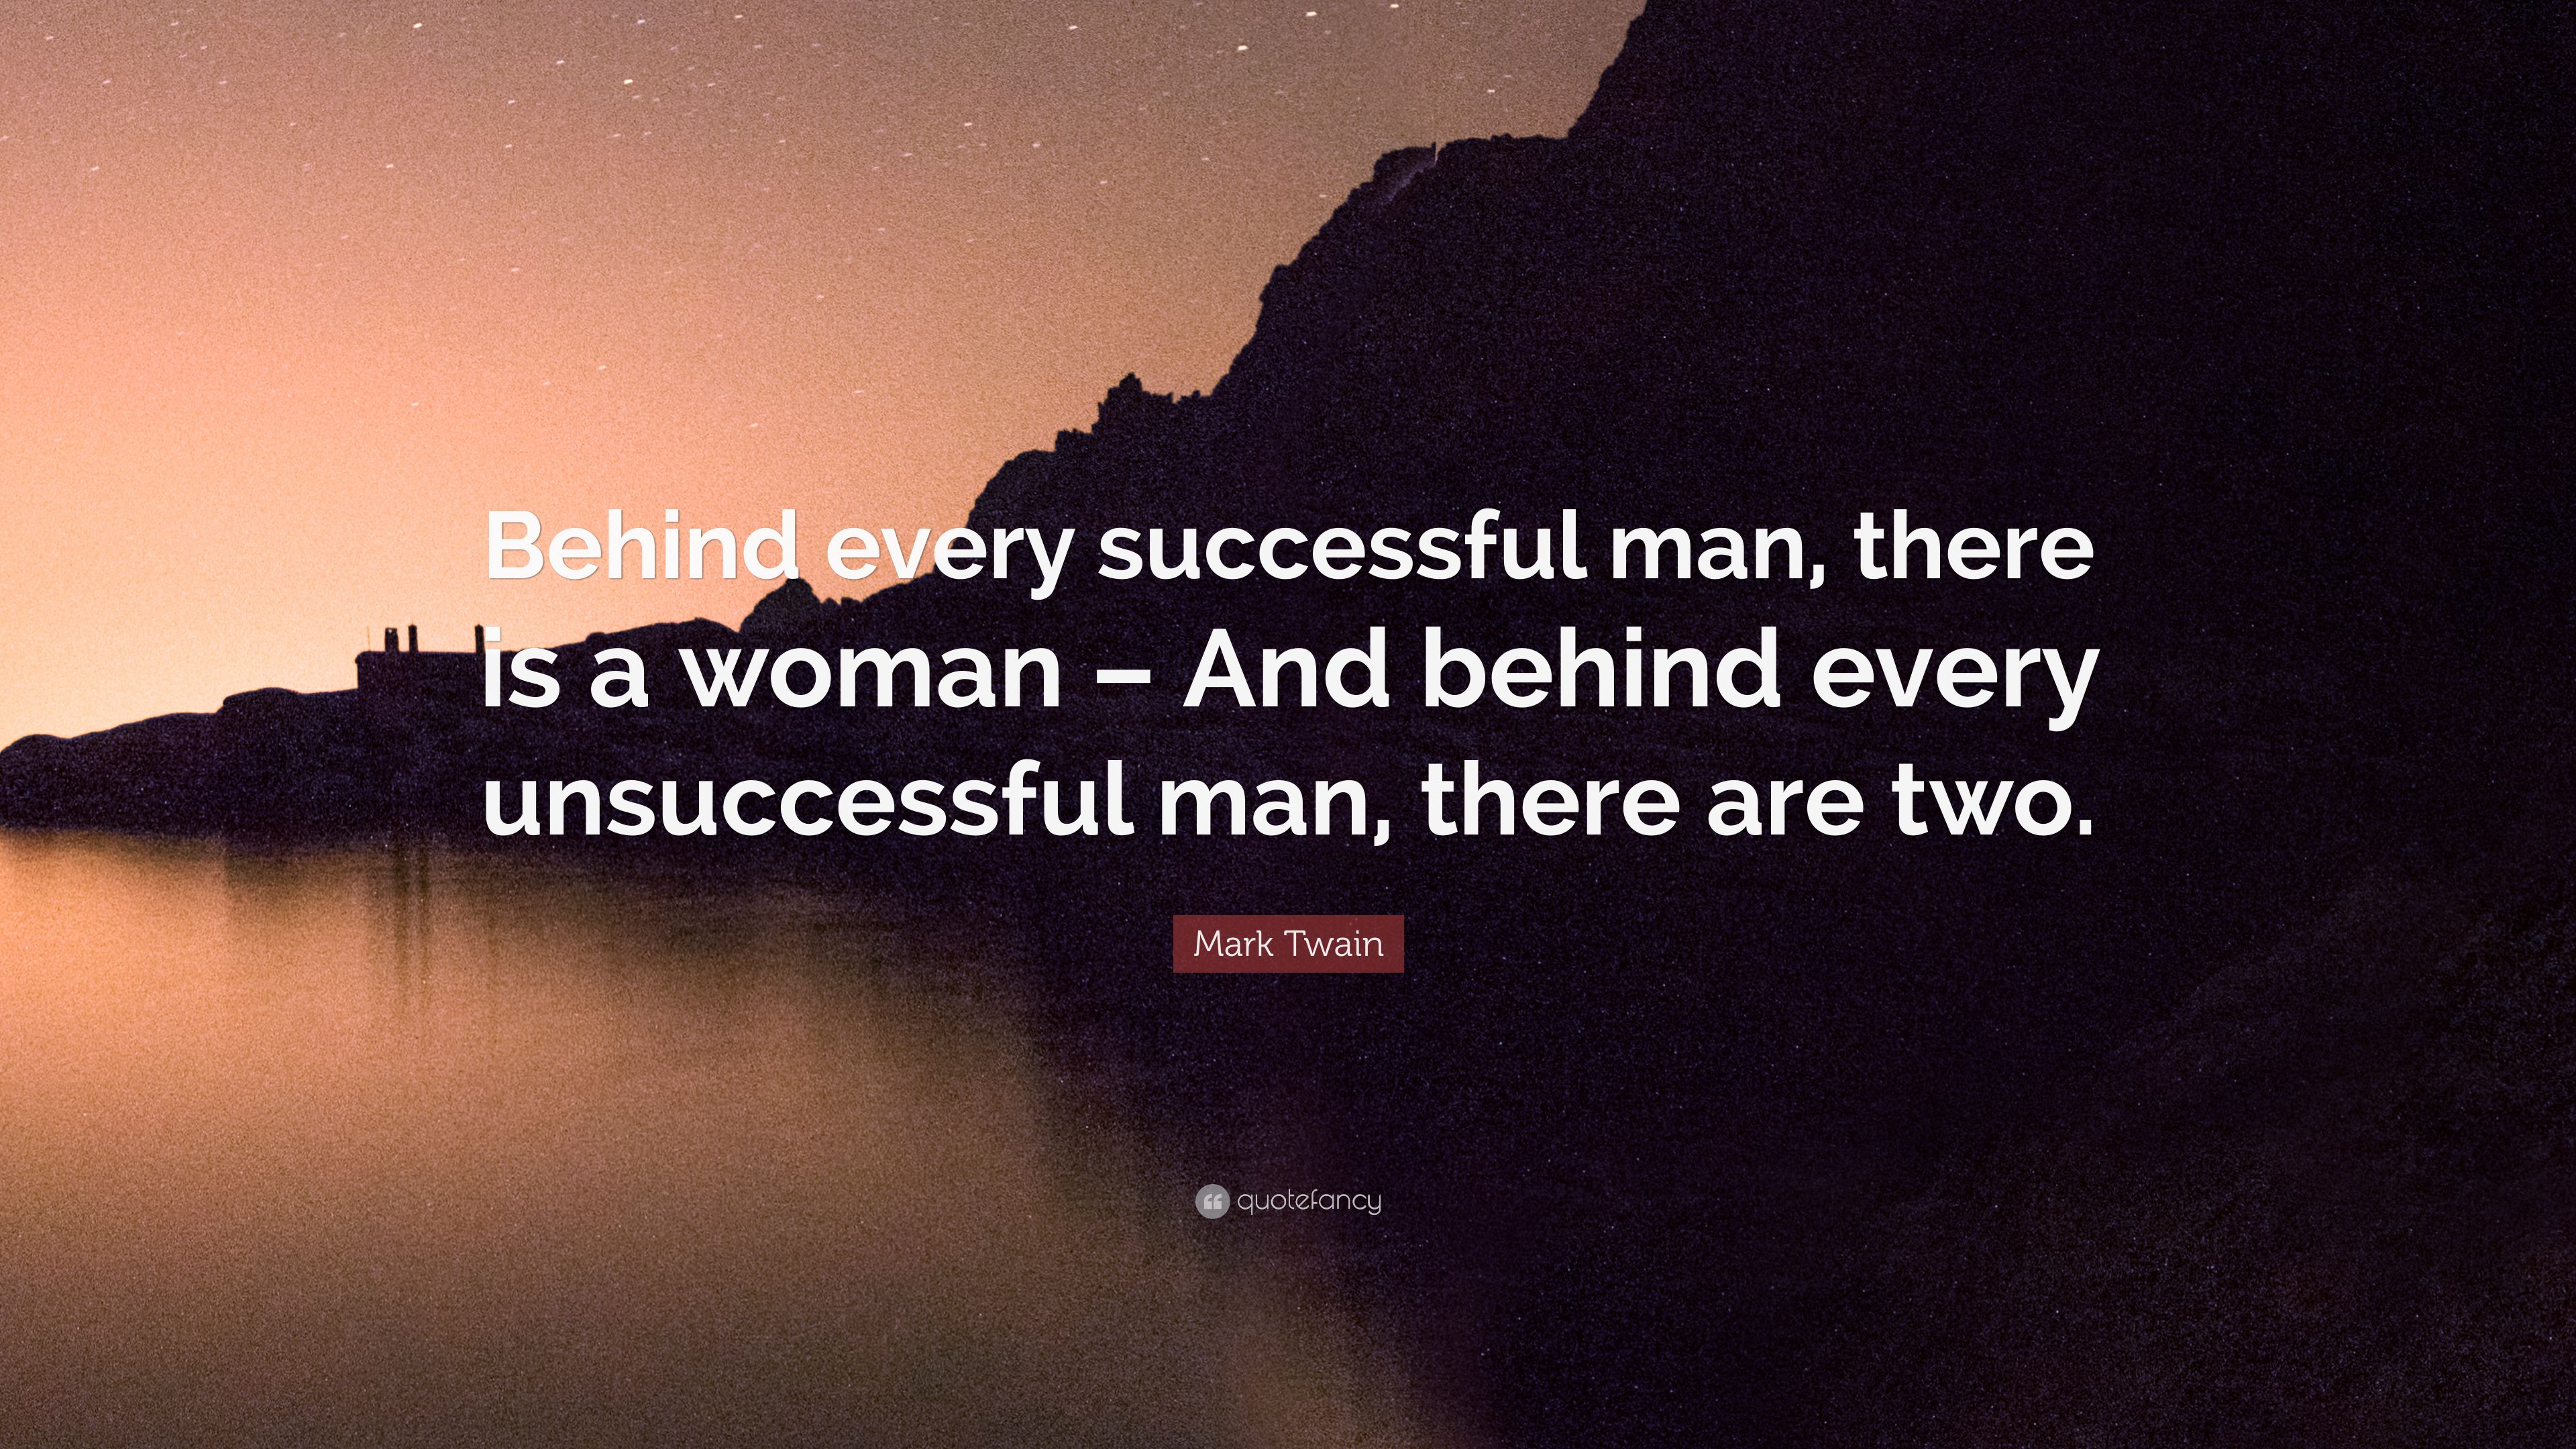 Mark Twain Quote: “Behind every successful man, there is a woman